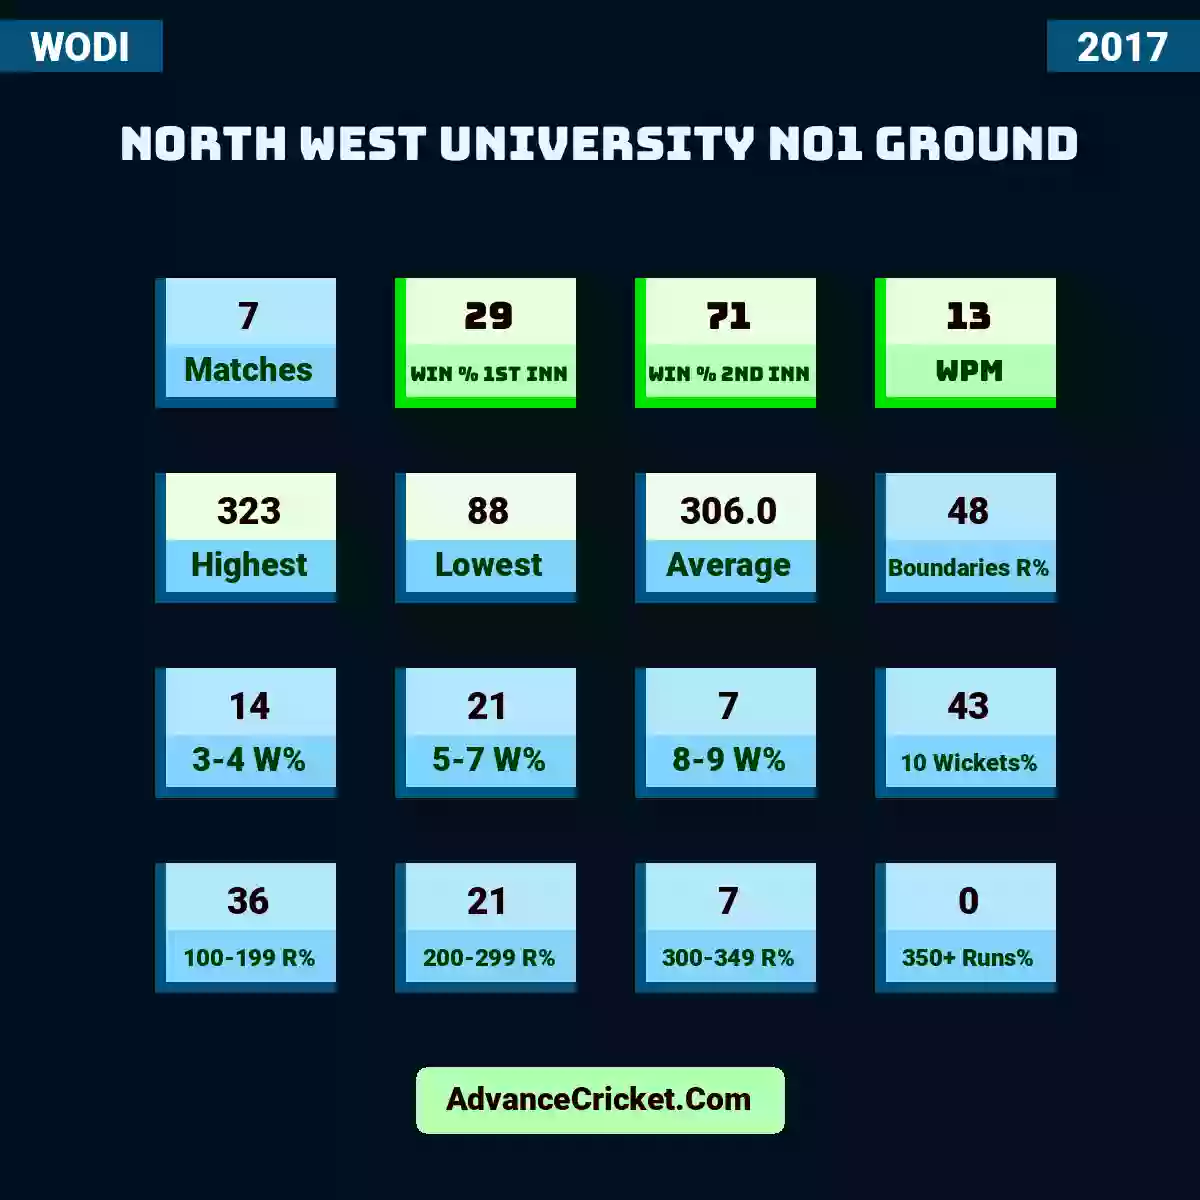 Image showing North West University No1 Ground with Matches: 7, Win % 1st Inn: 29, Win % 2nd Inn: 71, WPM: 13, Highest: 323, Lowest: 88, Average: 306.0, Boundaries R%: 48, 3-4 W%: 14, 5-7 W%: 21, 8-9 W%: 7, 10 Wickets%: 43, 100-199 R%: 36, 200-299 R%: 21, 300-349 R%: 7, 350+ Runs%: 0.